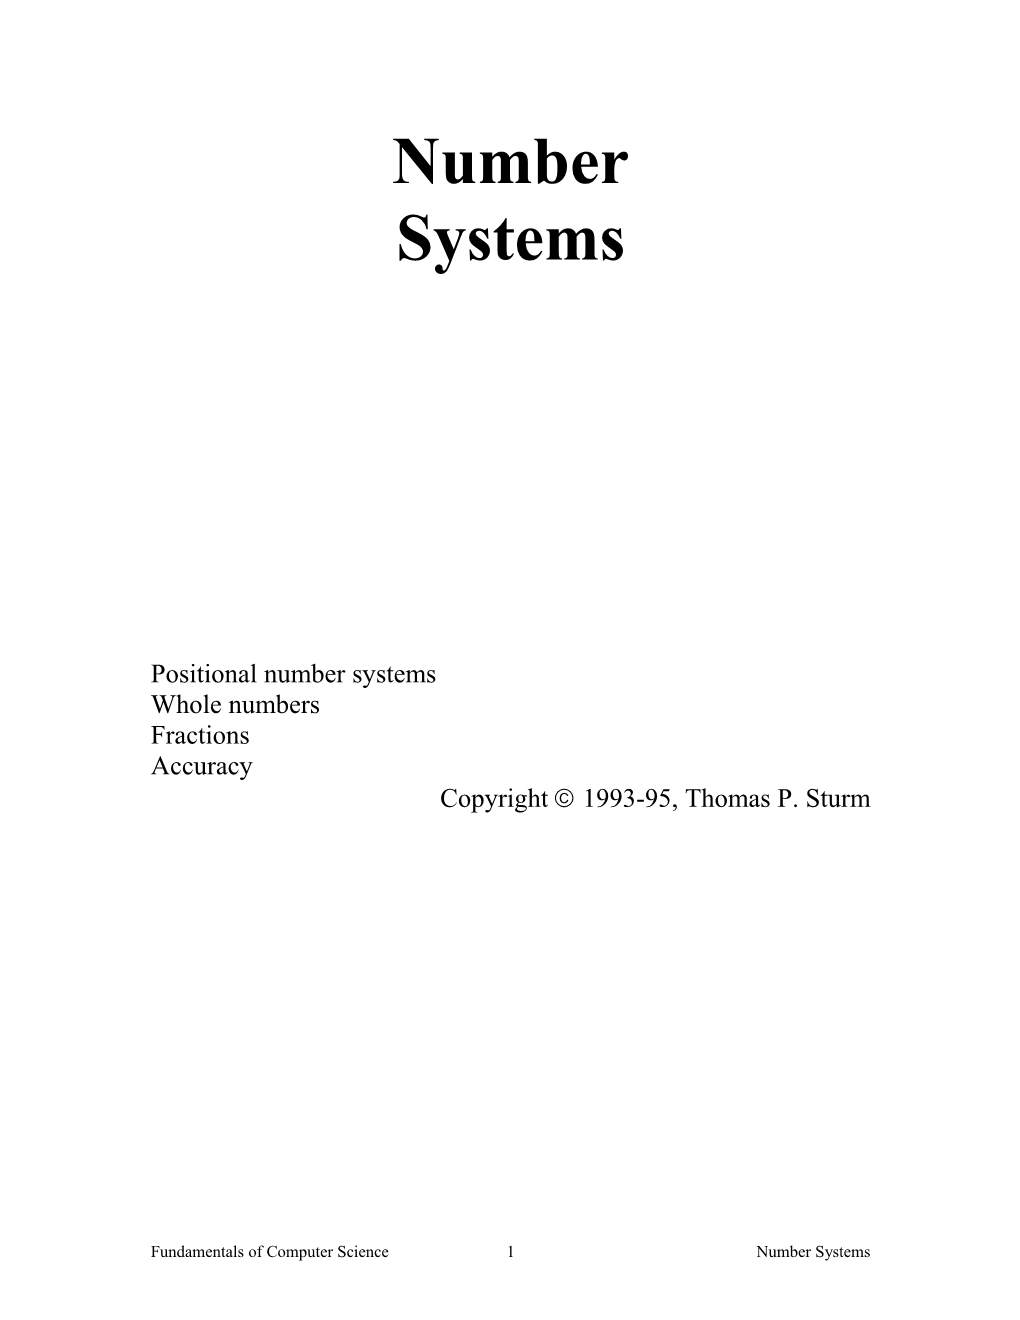 Positional Number Systems